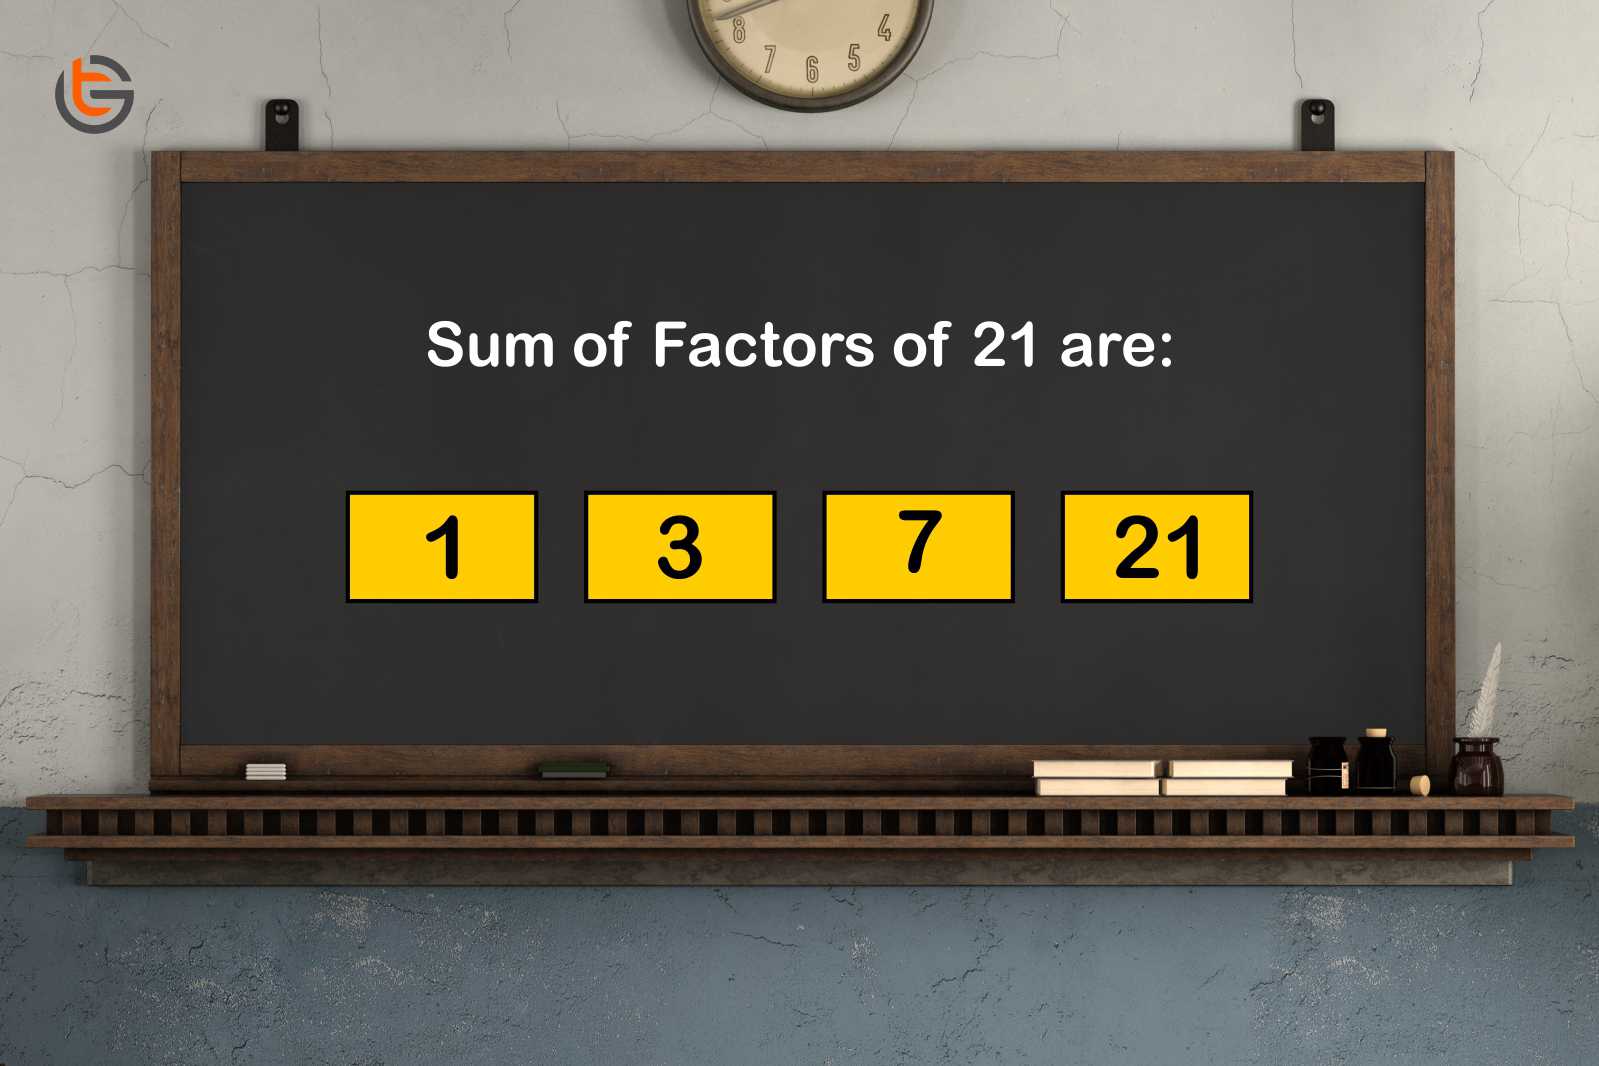 What is the sum of factors of 21 ?